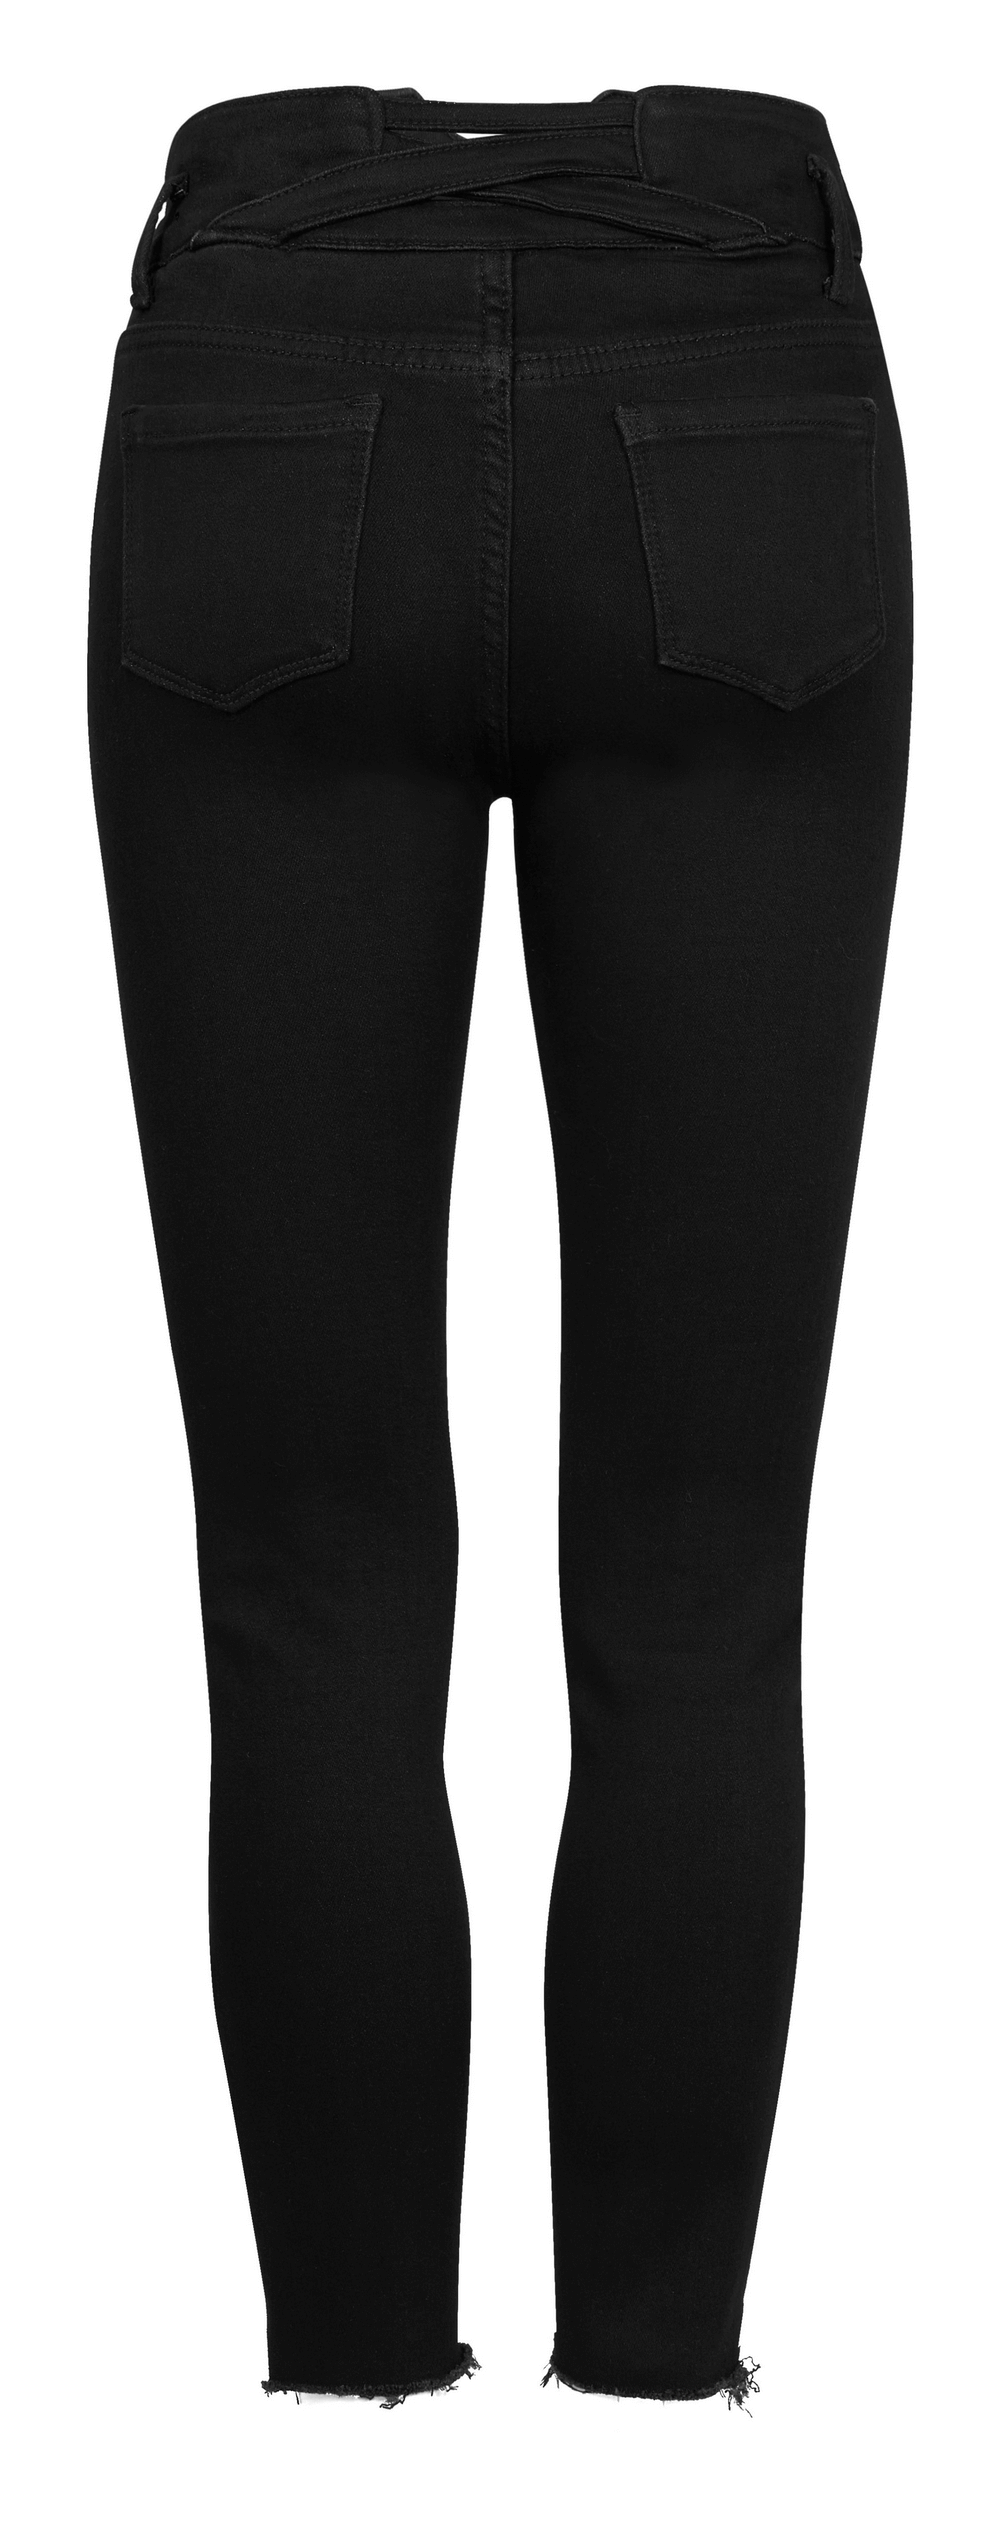 Black High-Waist Skinny Jeans with Strap Details - HARD'N'HEAVY